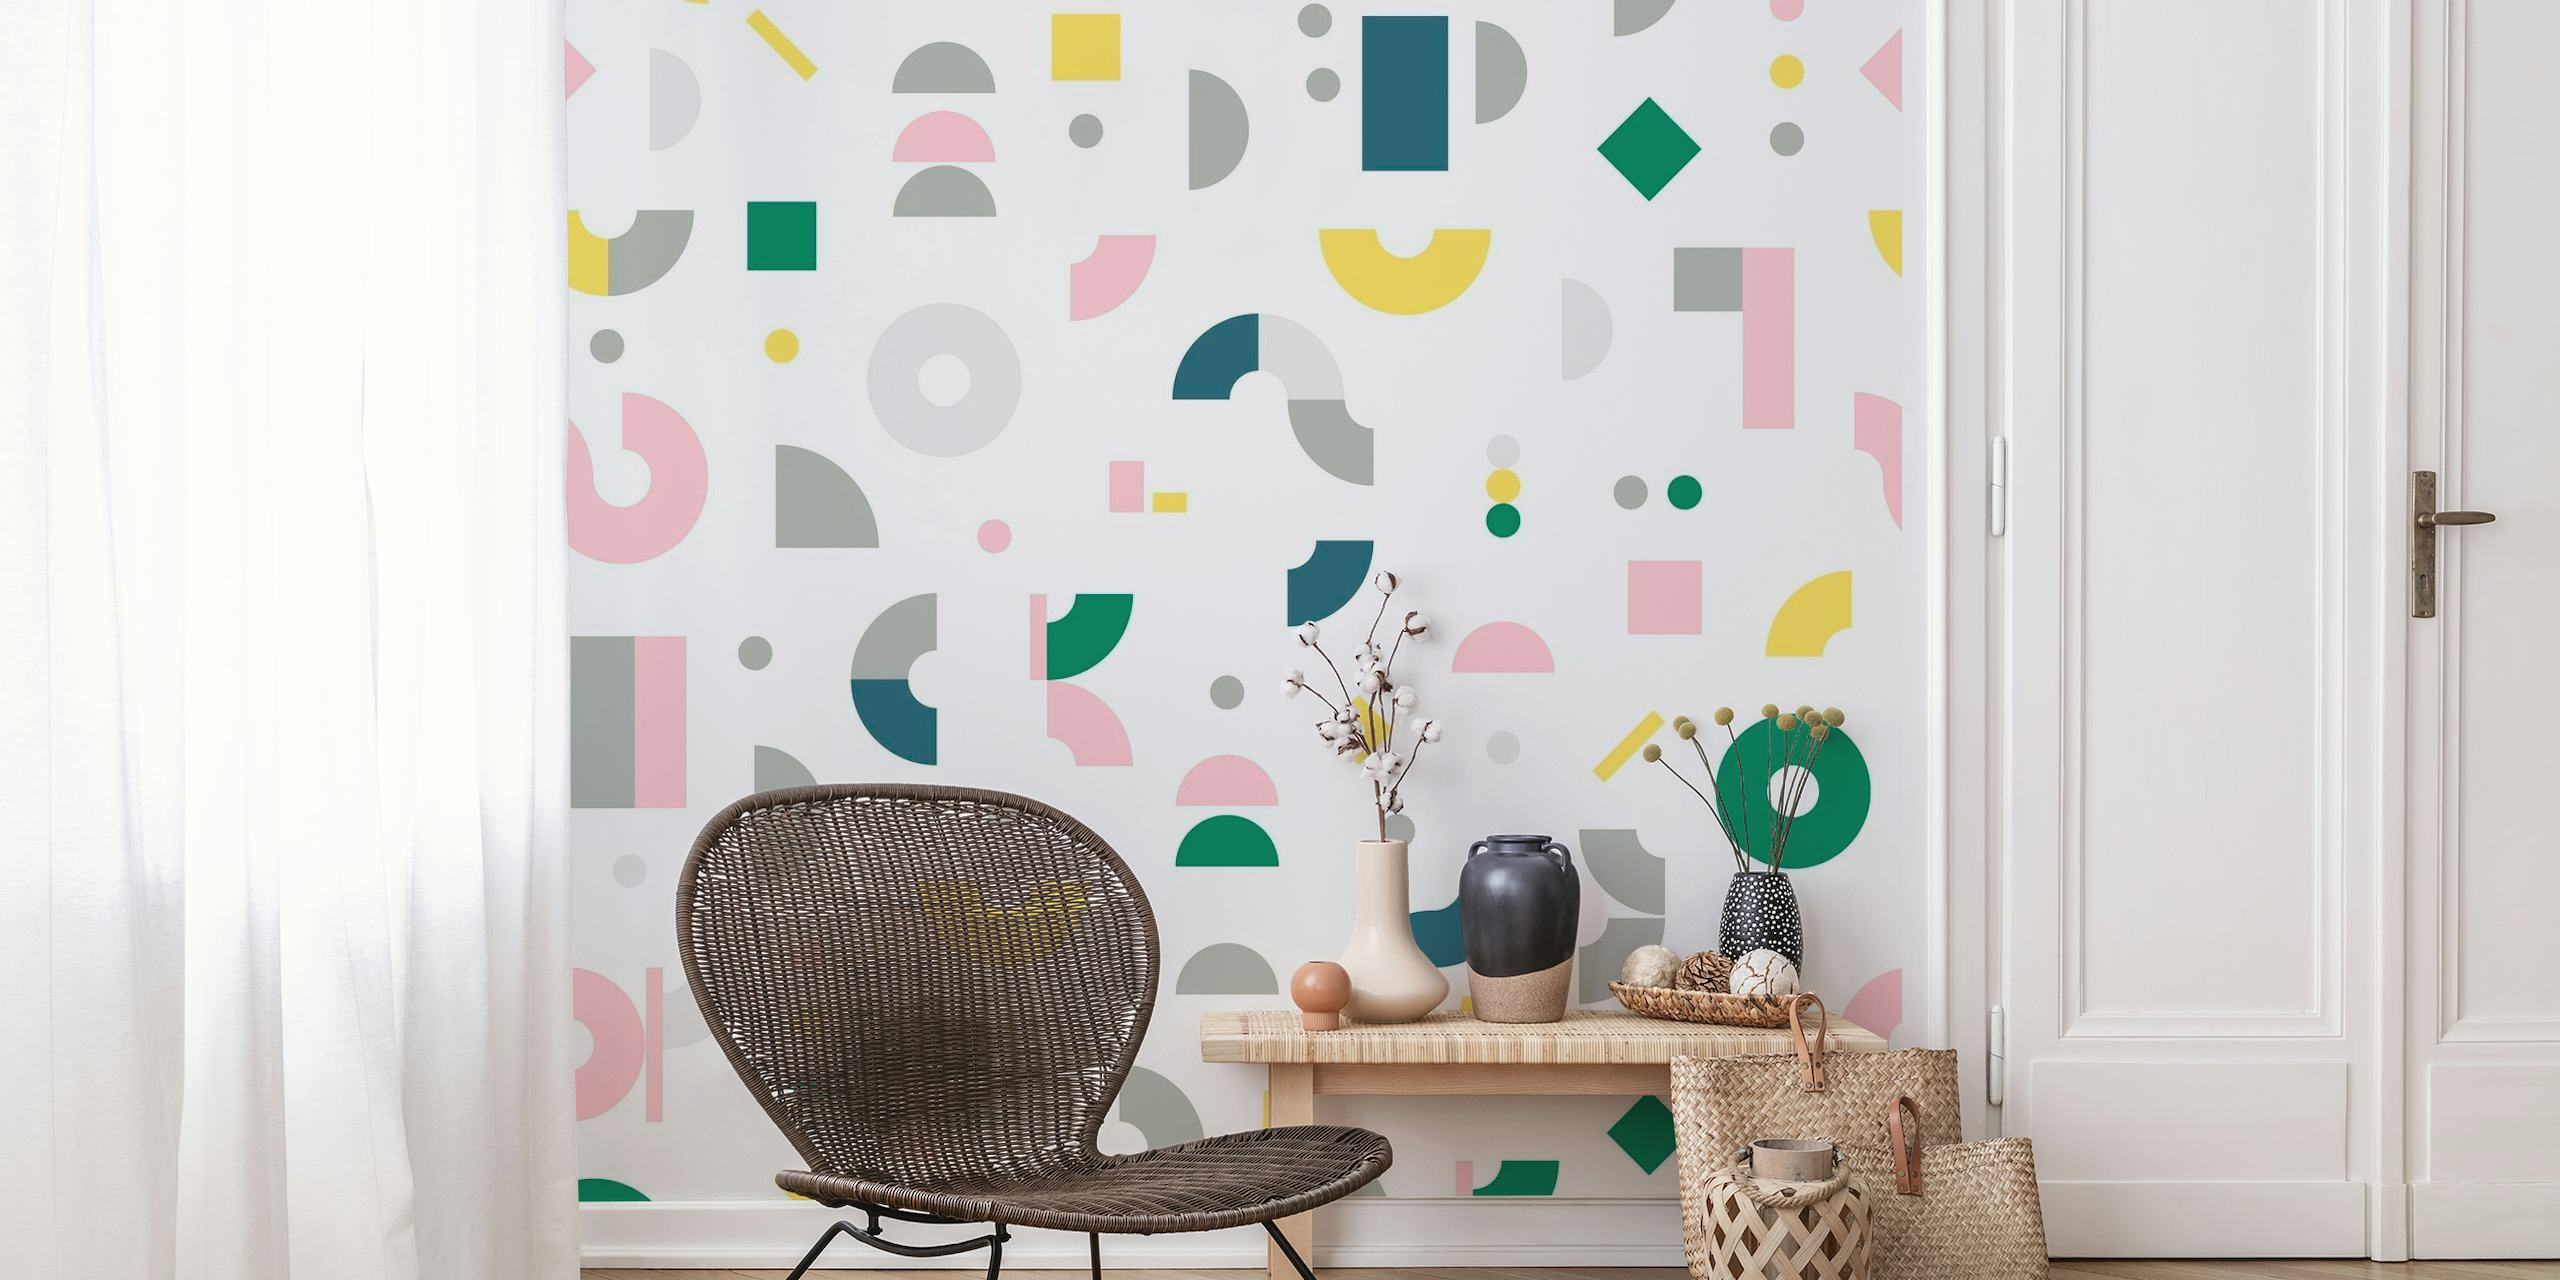 Abstract geometric shapes wall mural in pastel colors